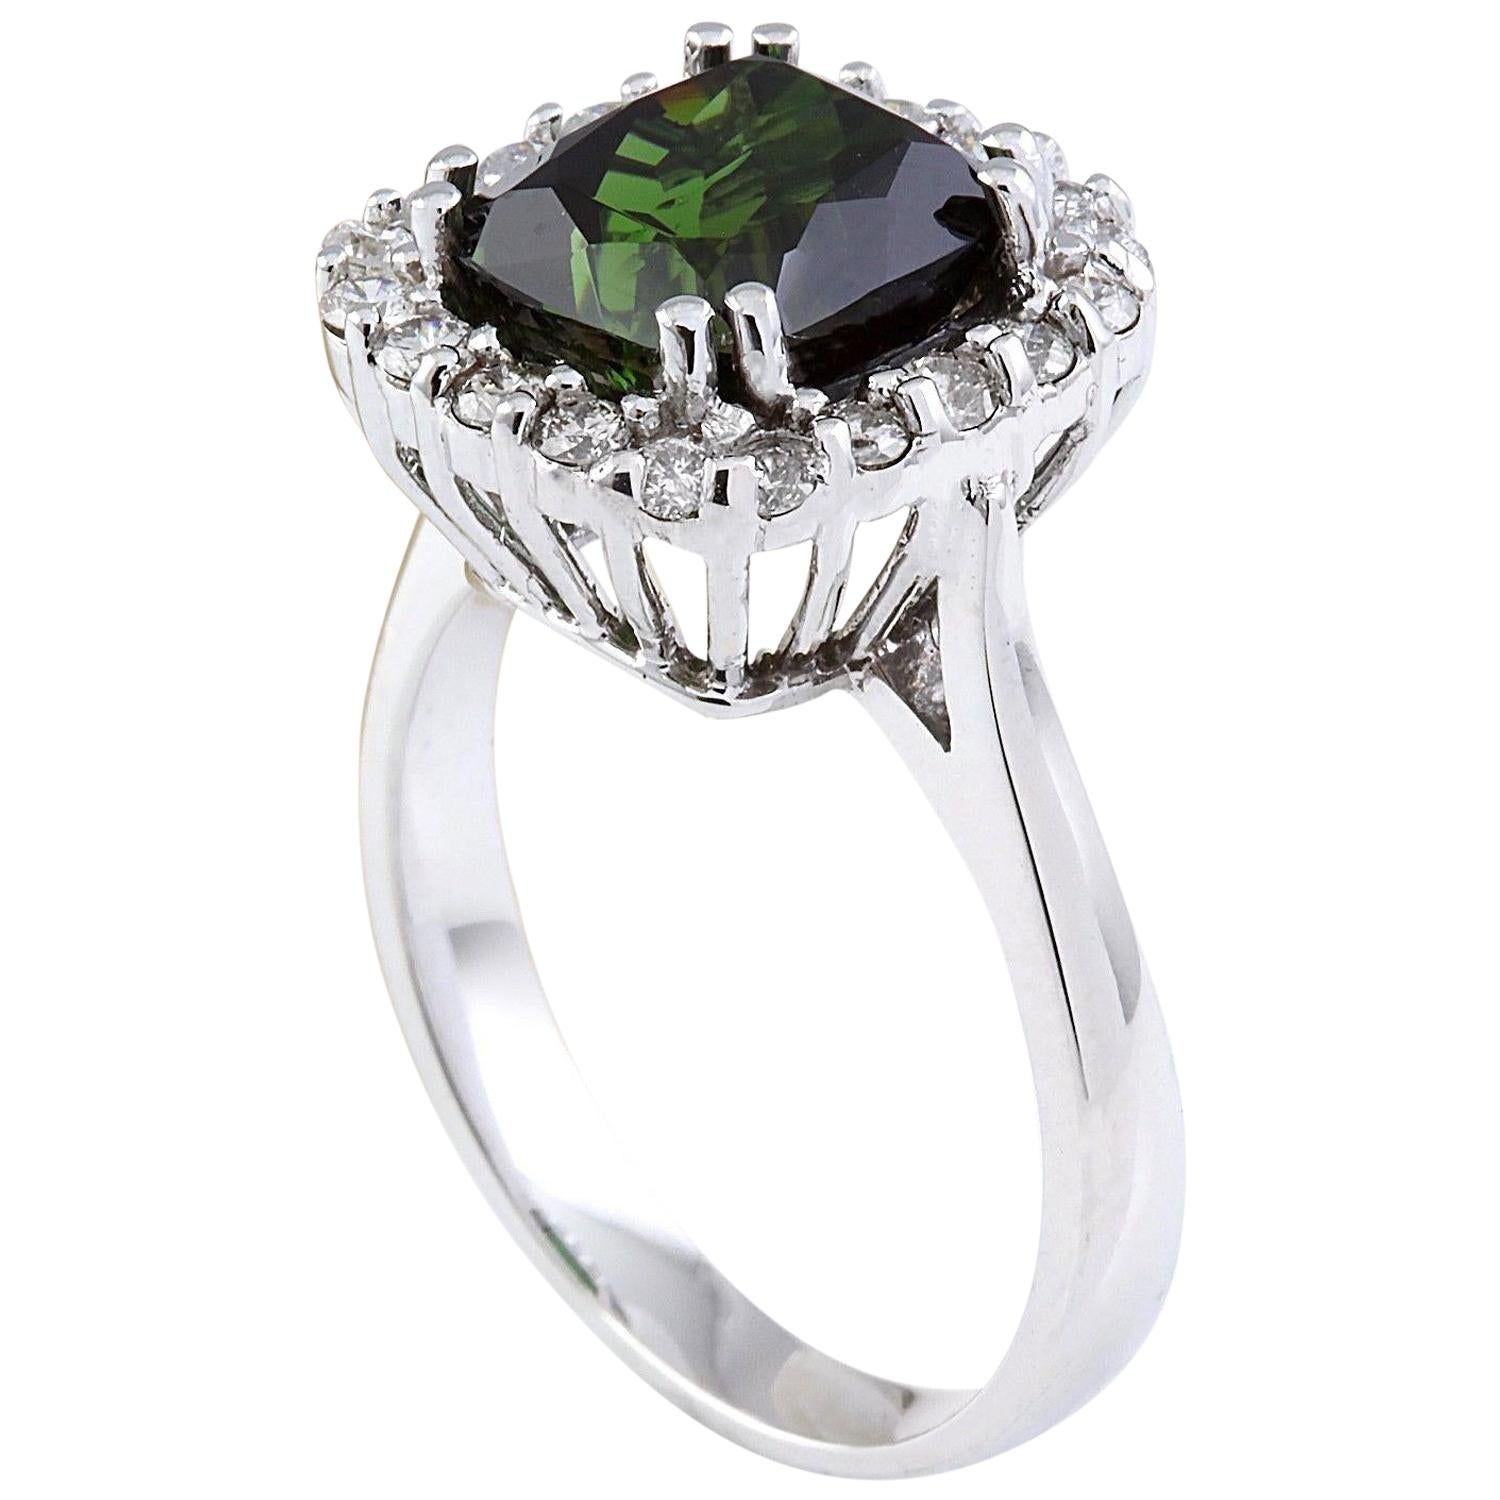 4.21 Carat Natural Tourmaline 14 Karat Solid White Gold Diamond Ring In New Condition For Sale In Los Angeles, CA